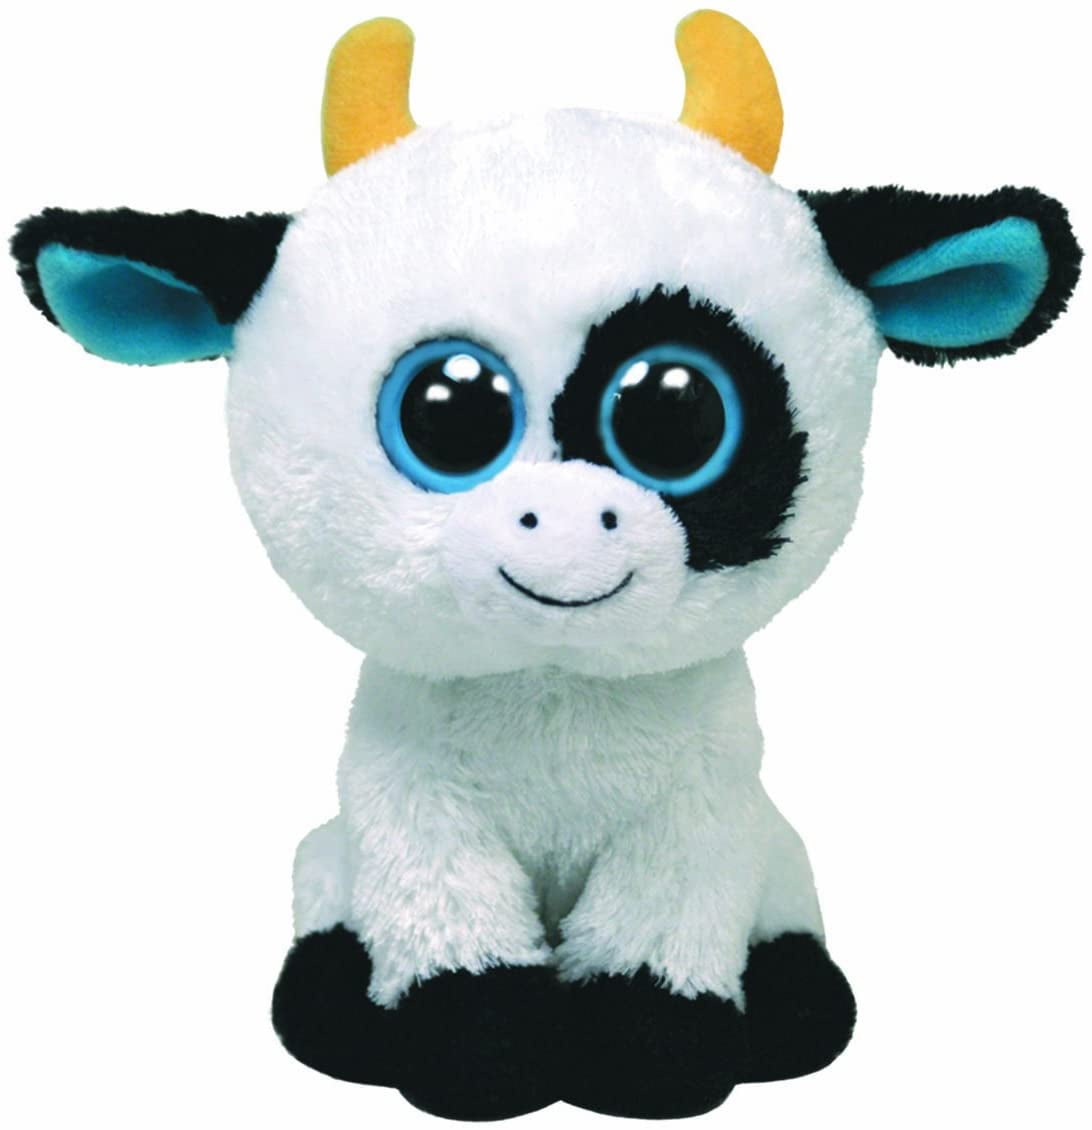 Ty Beanie Babies Daisy The Cow Toy for sale online 